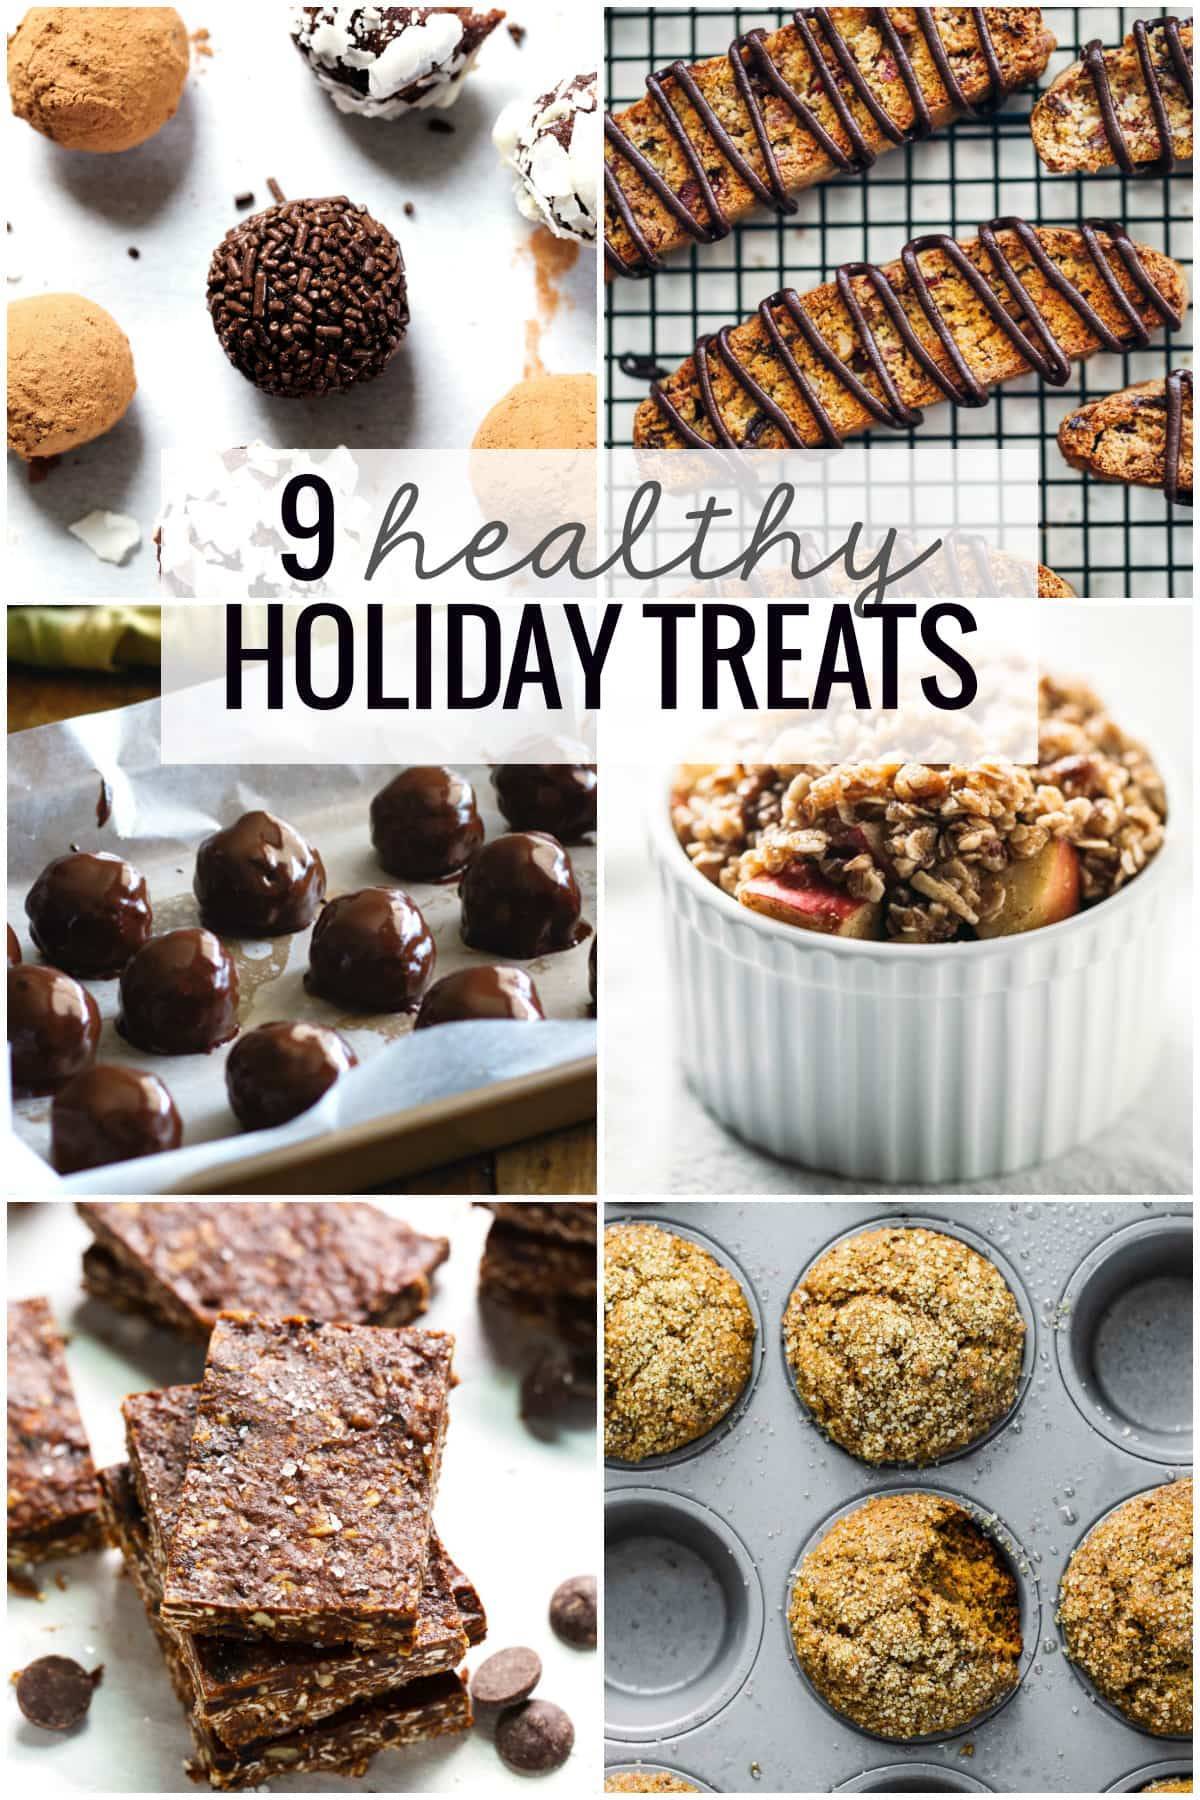 These nine healthy holiday treats use less sugar, whole grains, and help you keep your healthy glow during the sweets season! | pinchofyum.com